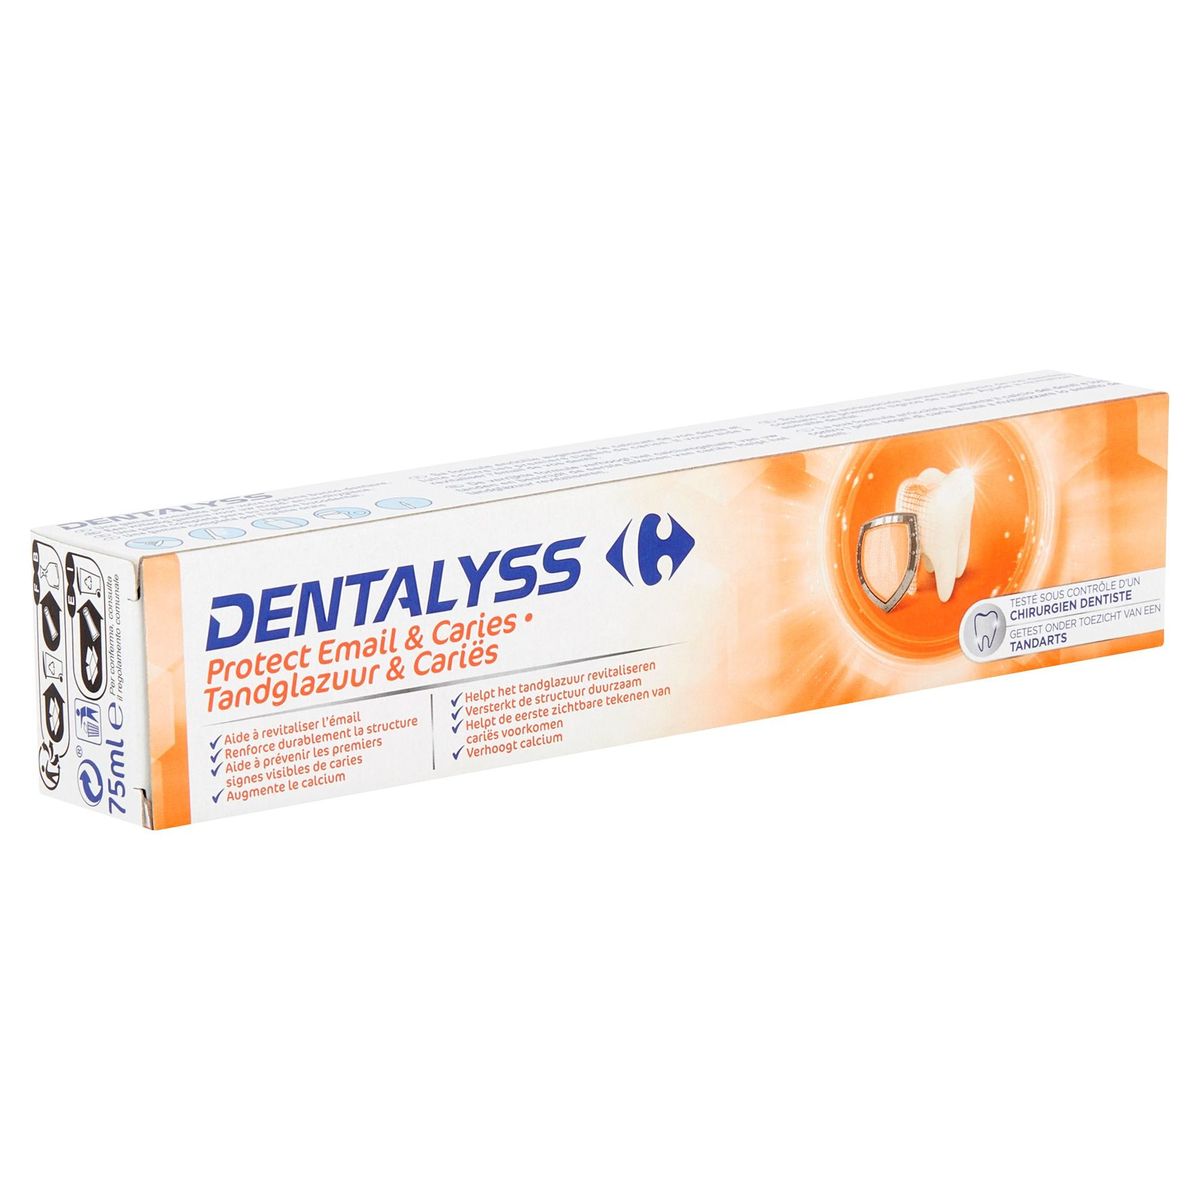 Carrefour Dentalyss Protect Email & Caries Dentifrice 75 ml